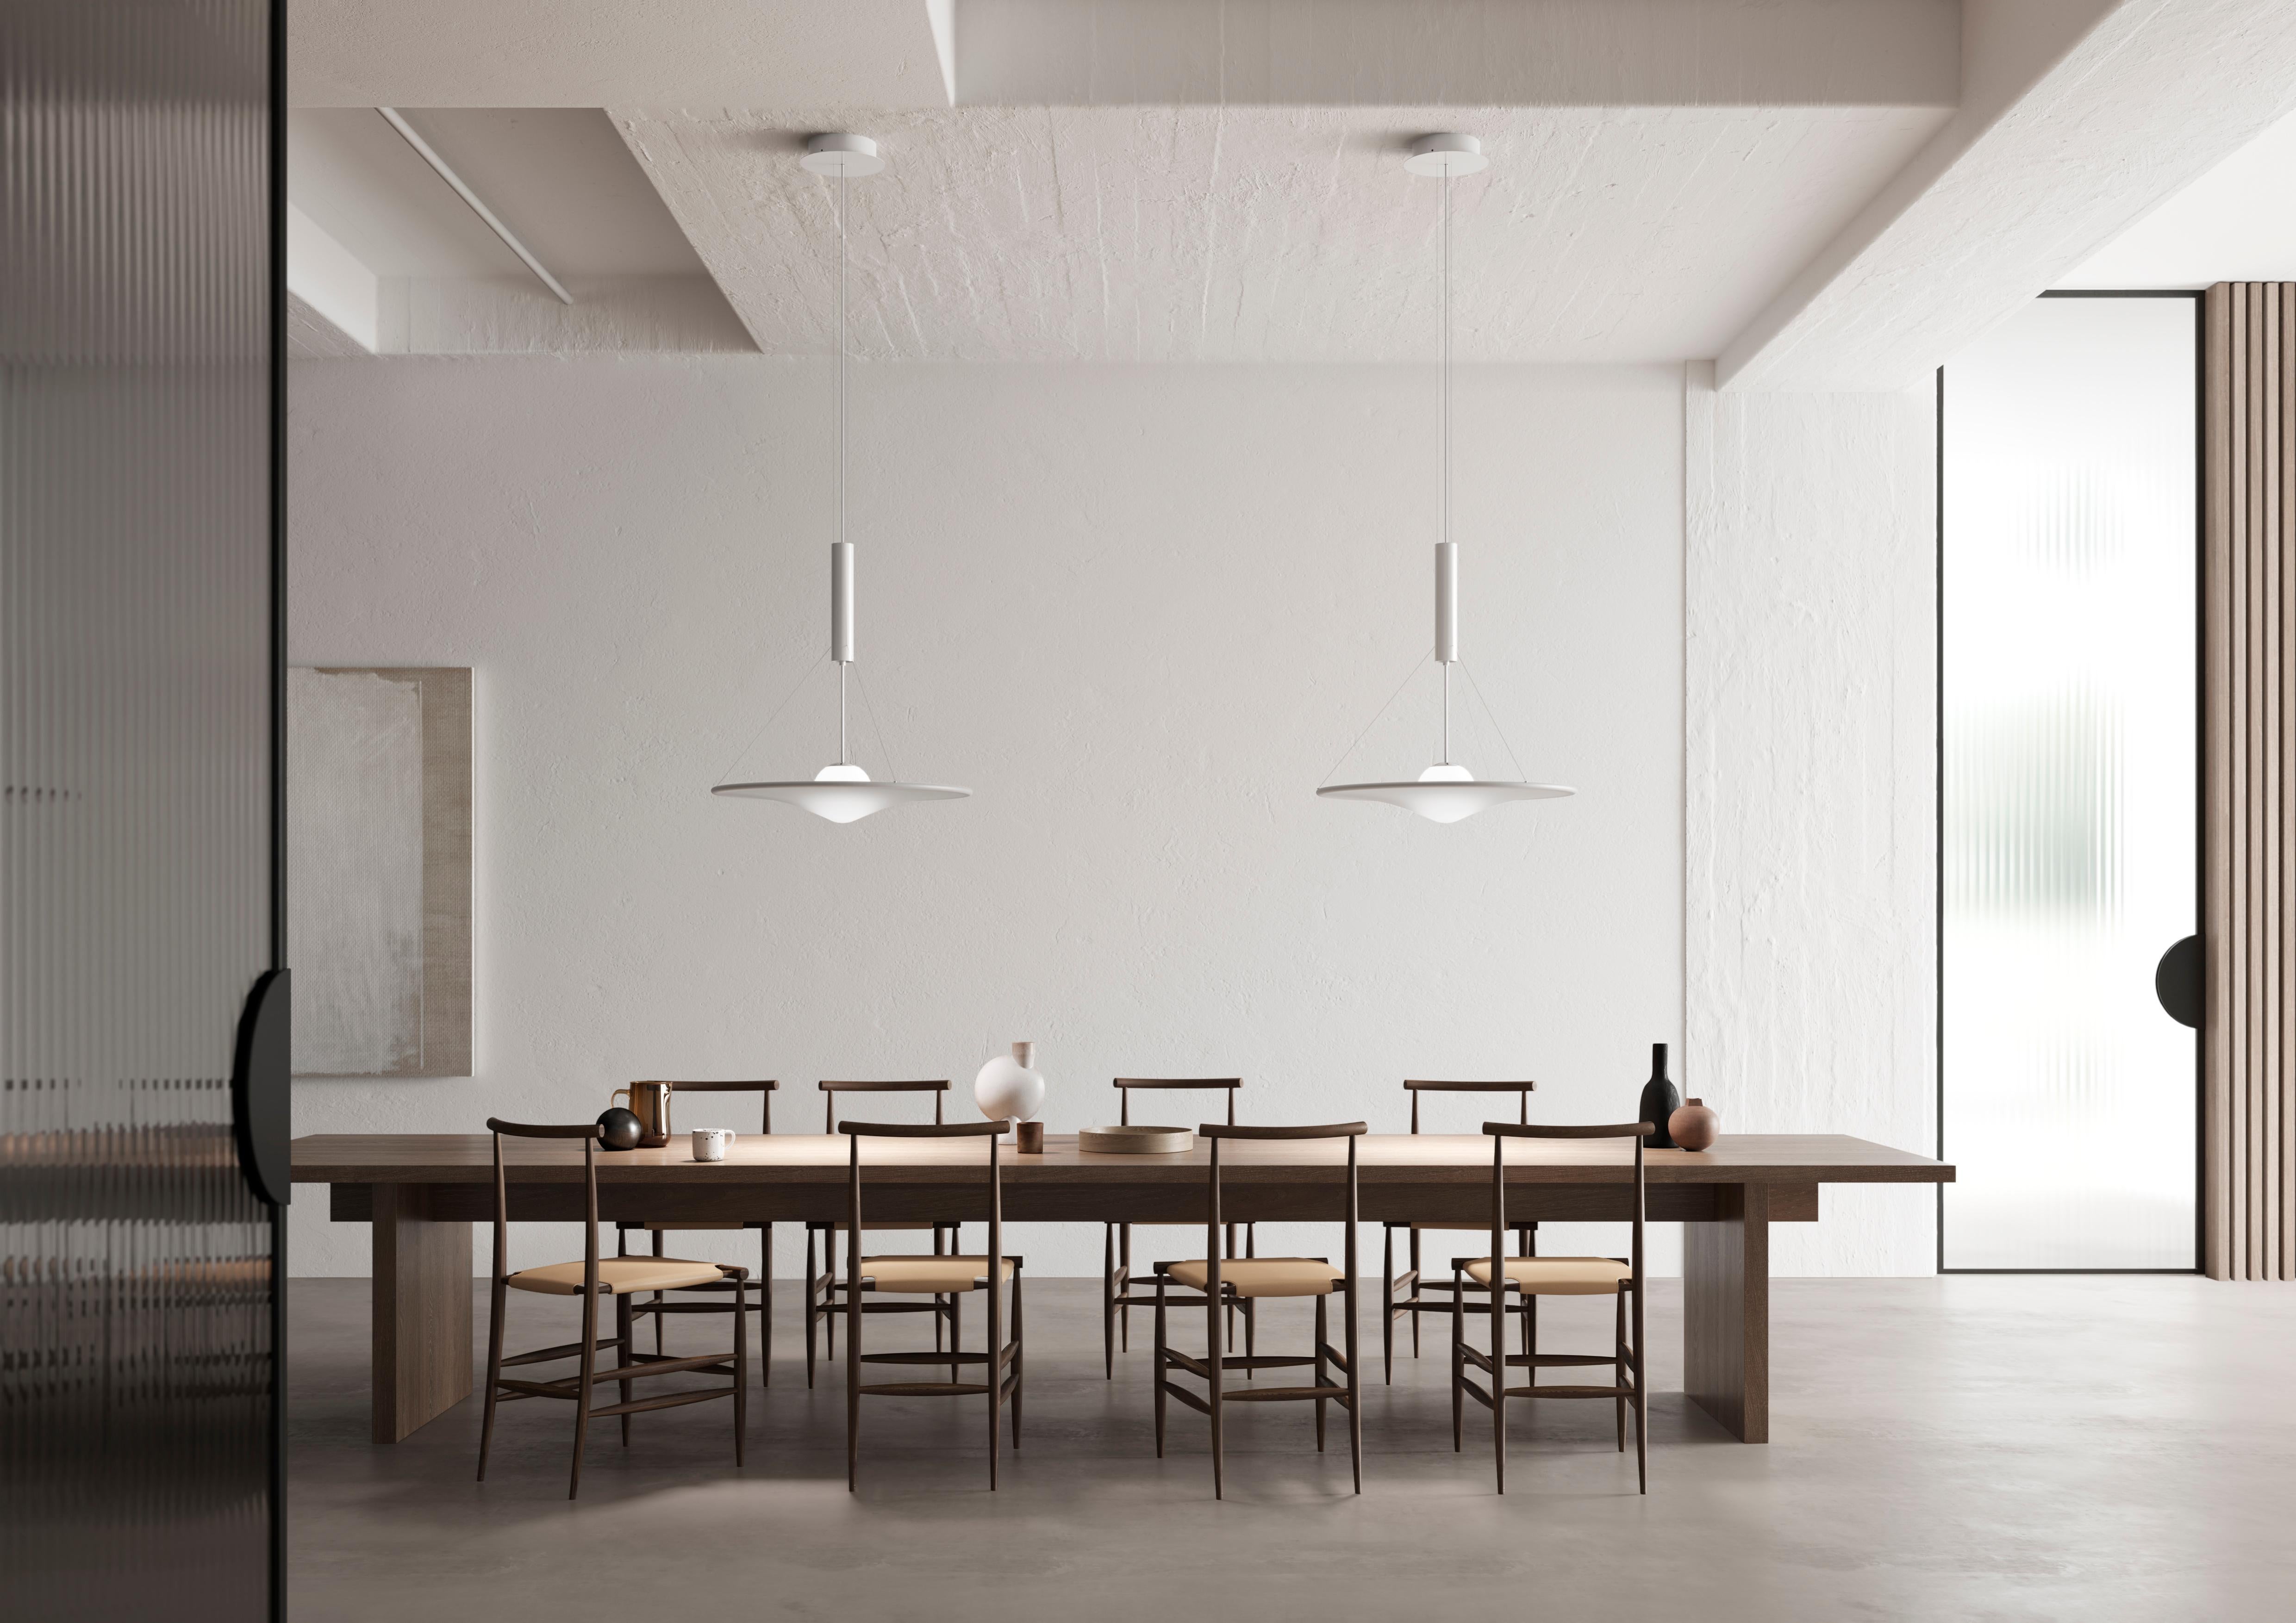 Manto 70 (small) – designed by Davide Besozzi – is a collection of suspension lamps, available in three sizes.
An opaline white blown glass sphere contains a LED light source and is supported by a telescopic arm, which can move the diffuser in